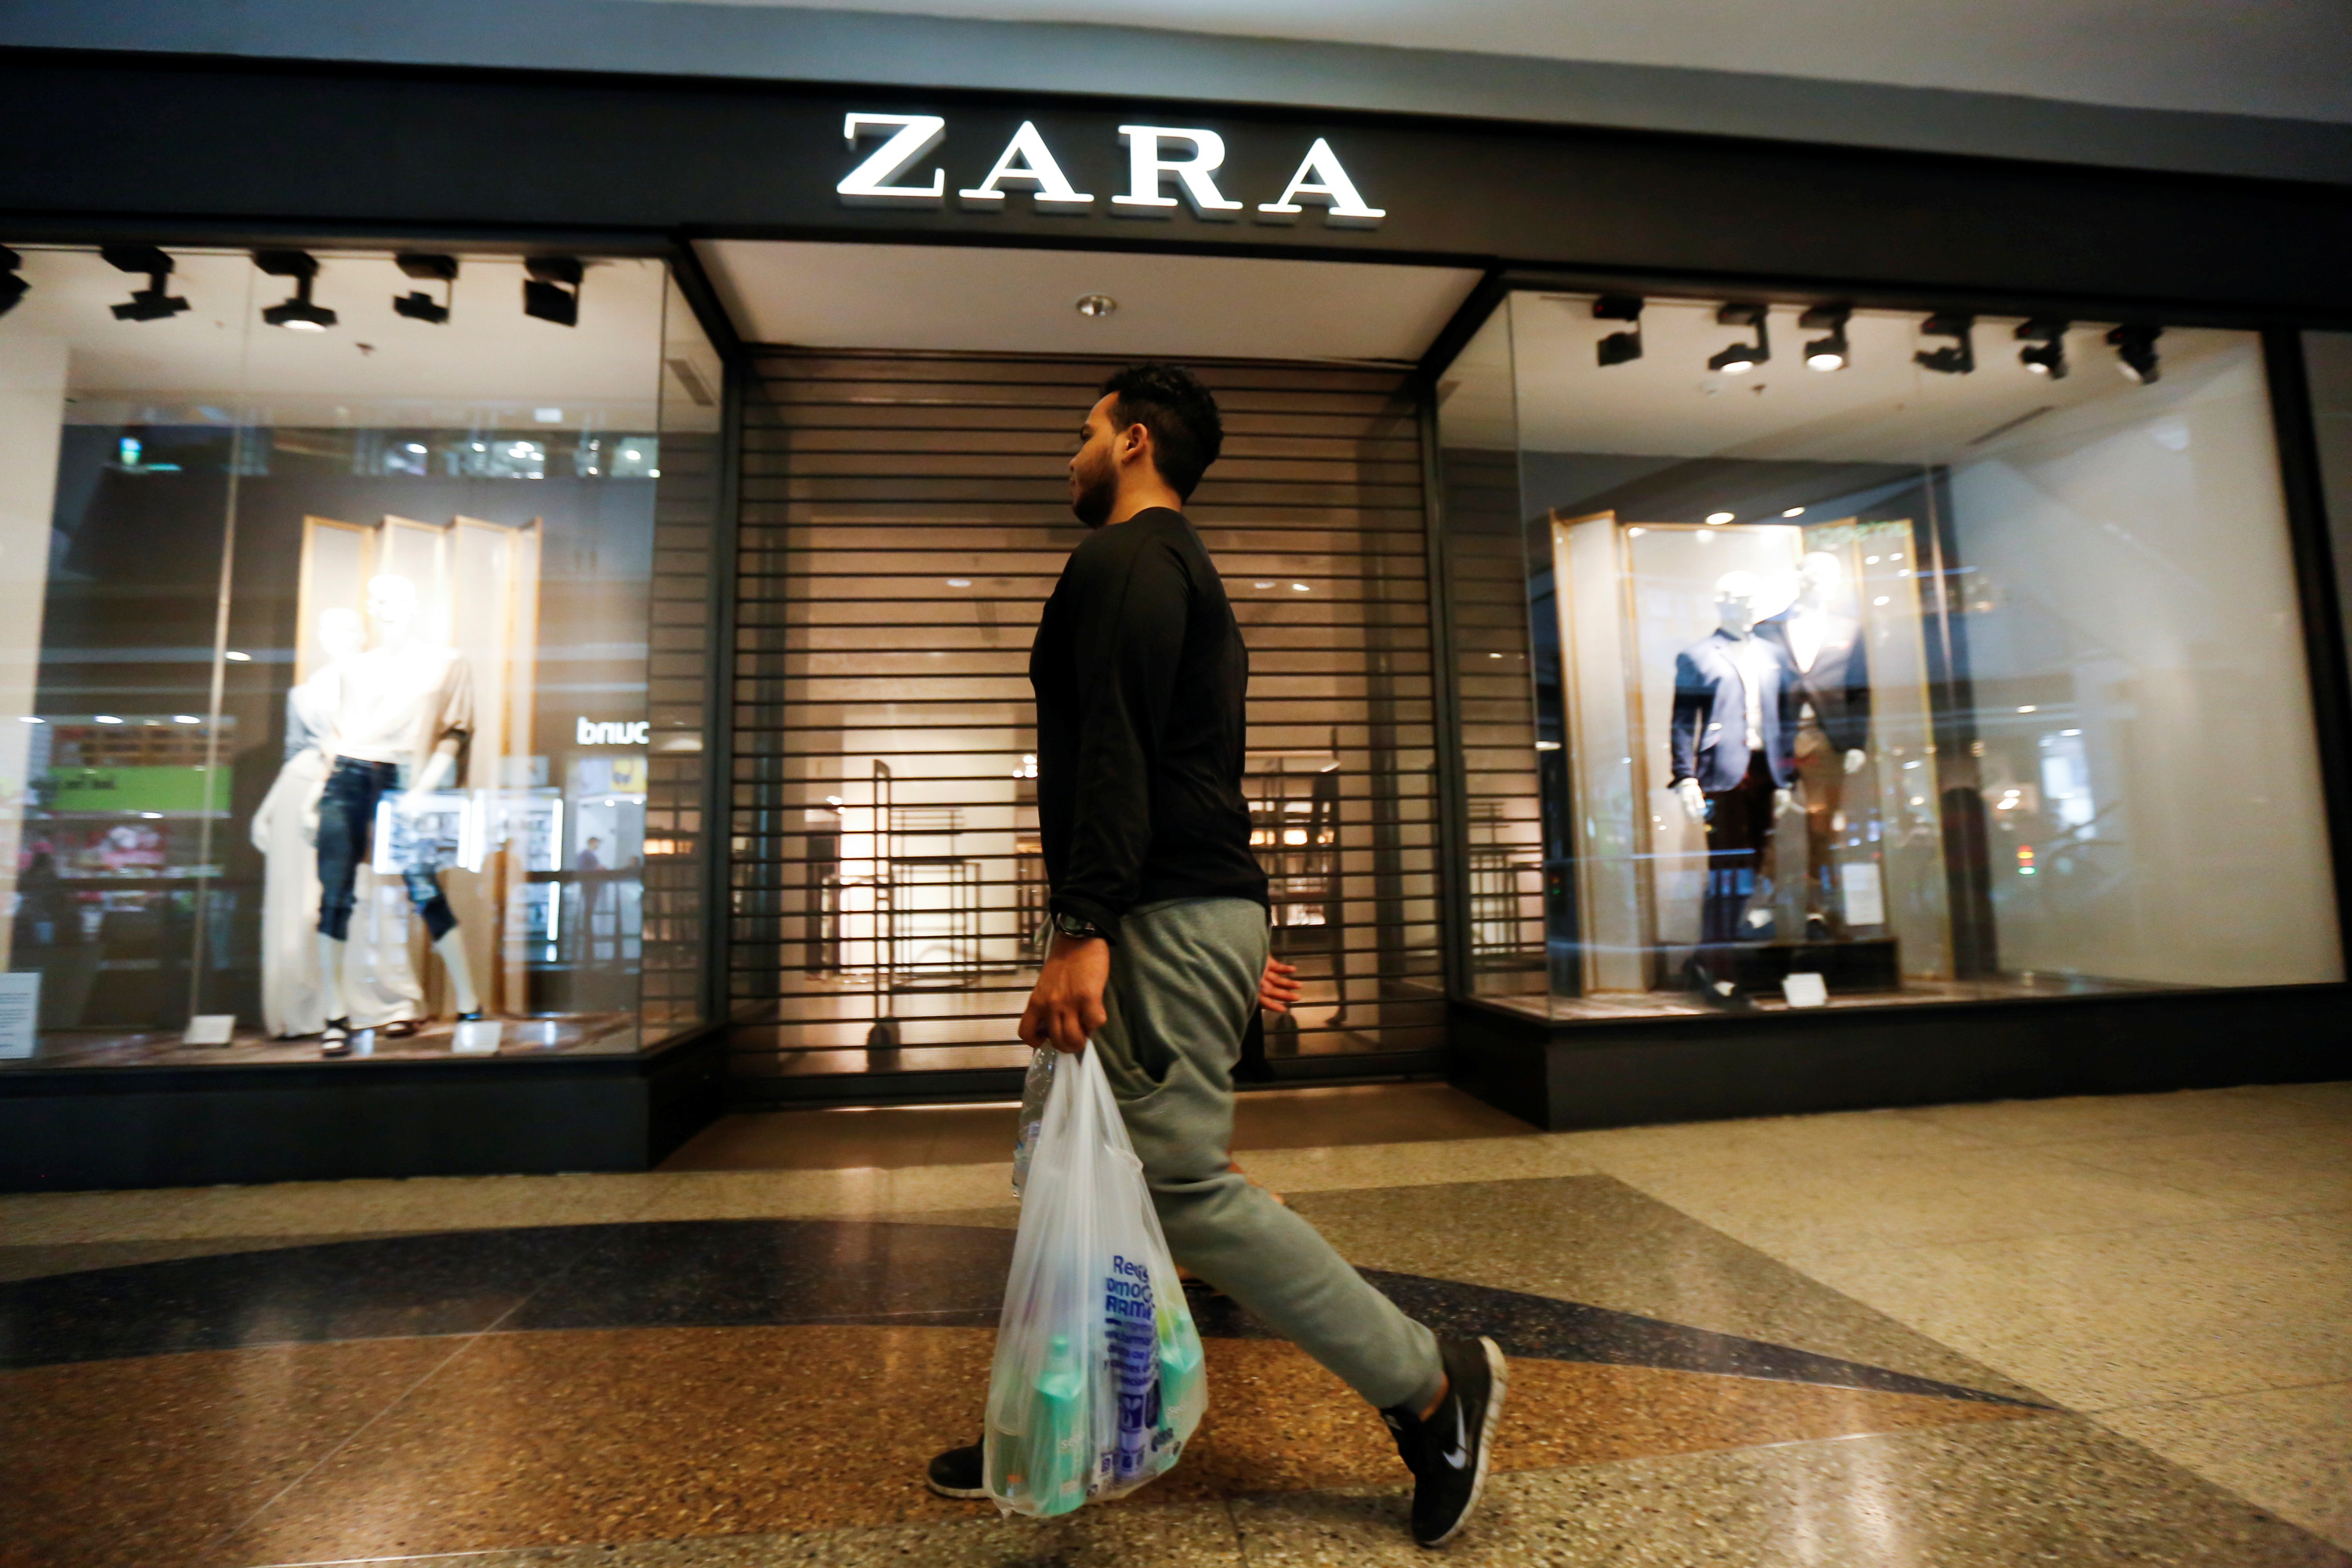 A man walks past a Zara retail store, with its shutters drawn, at a mall in Caracas